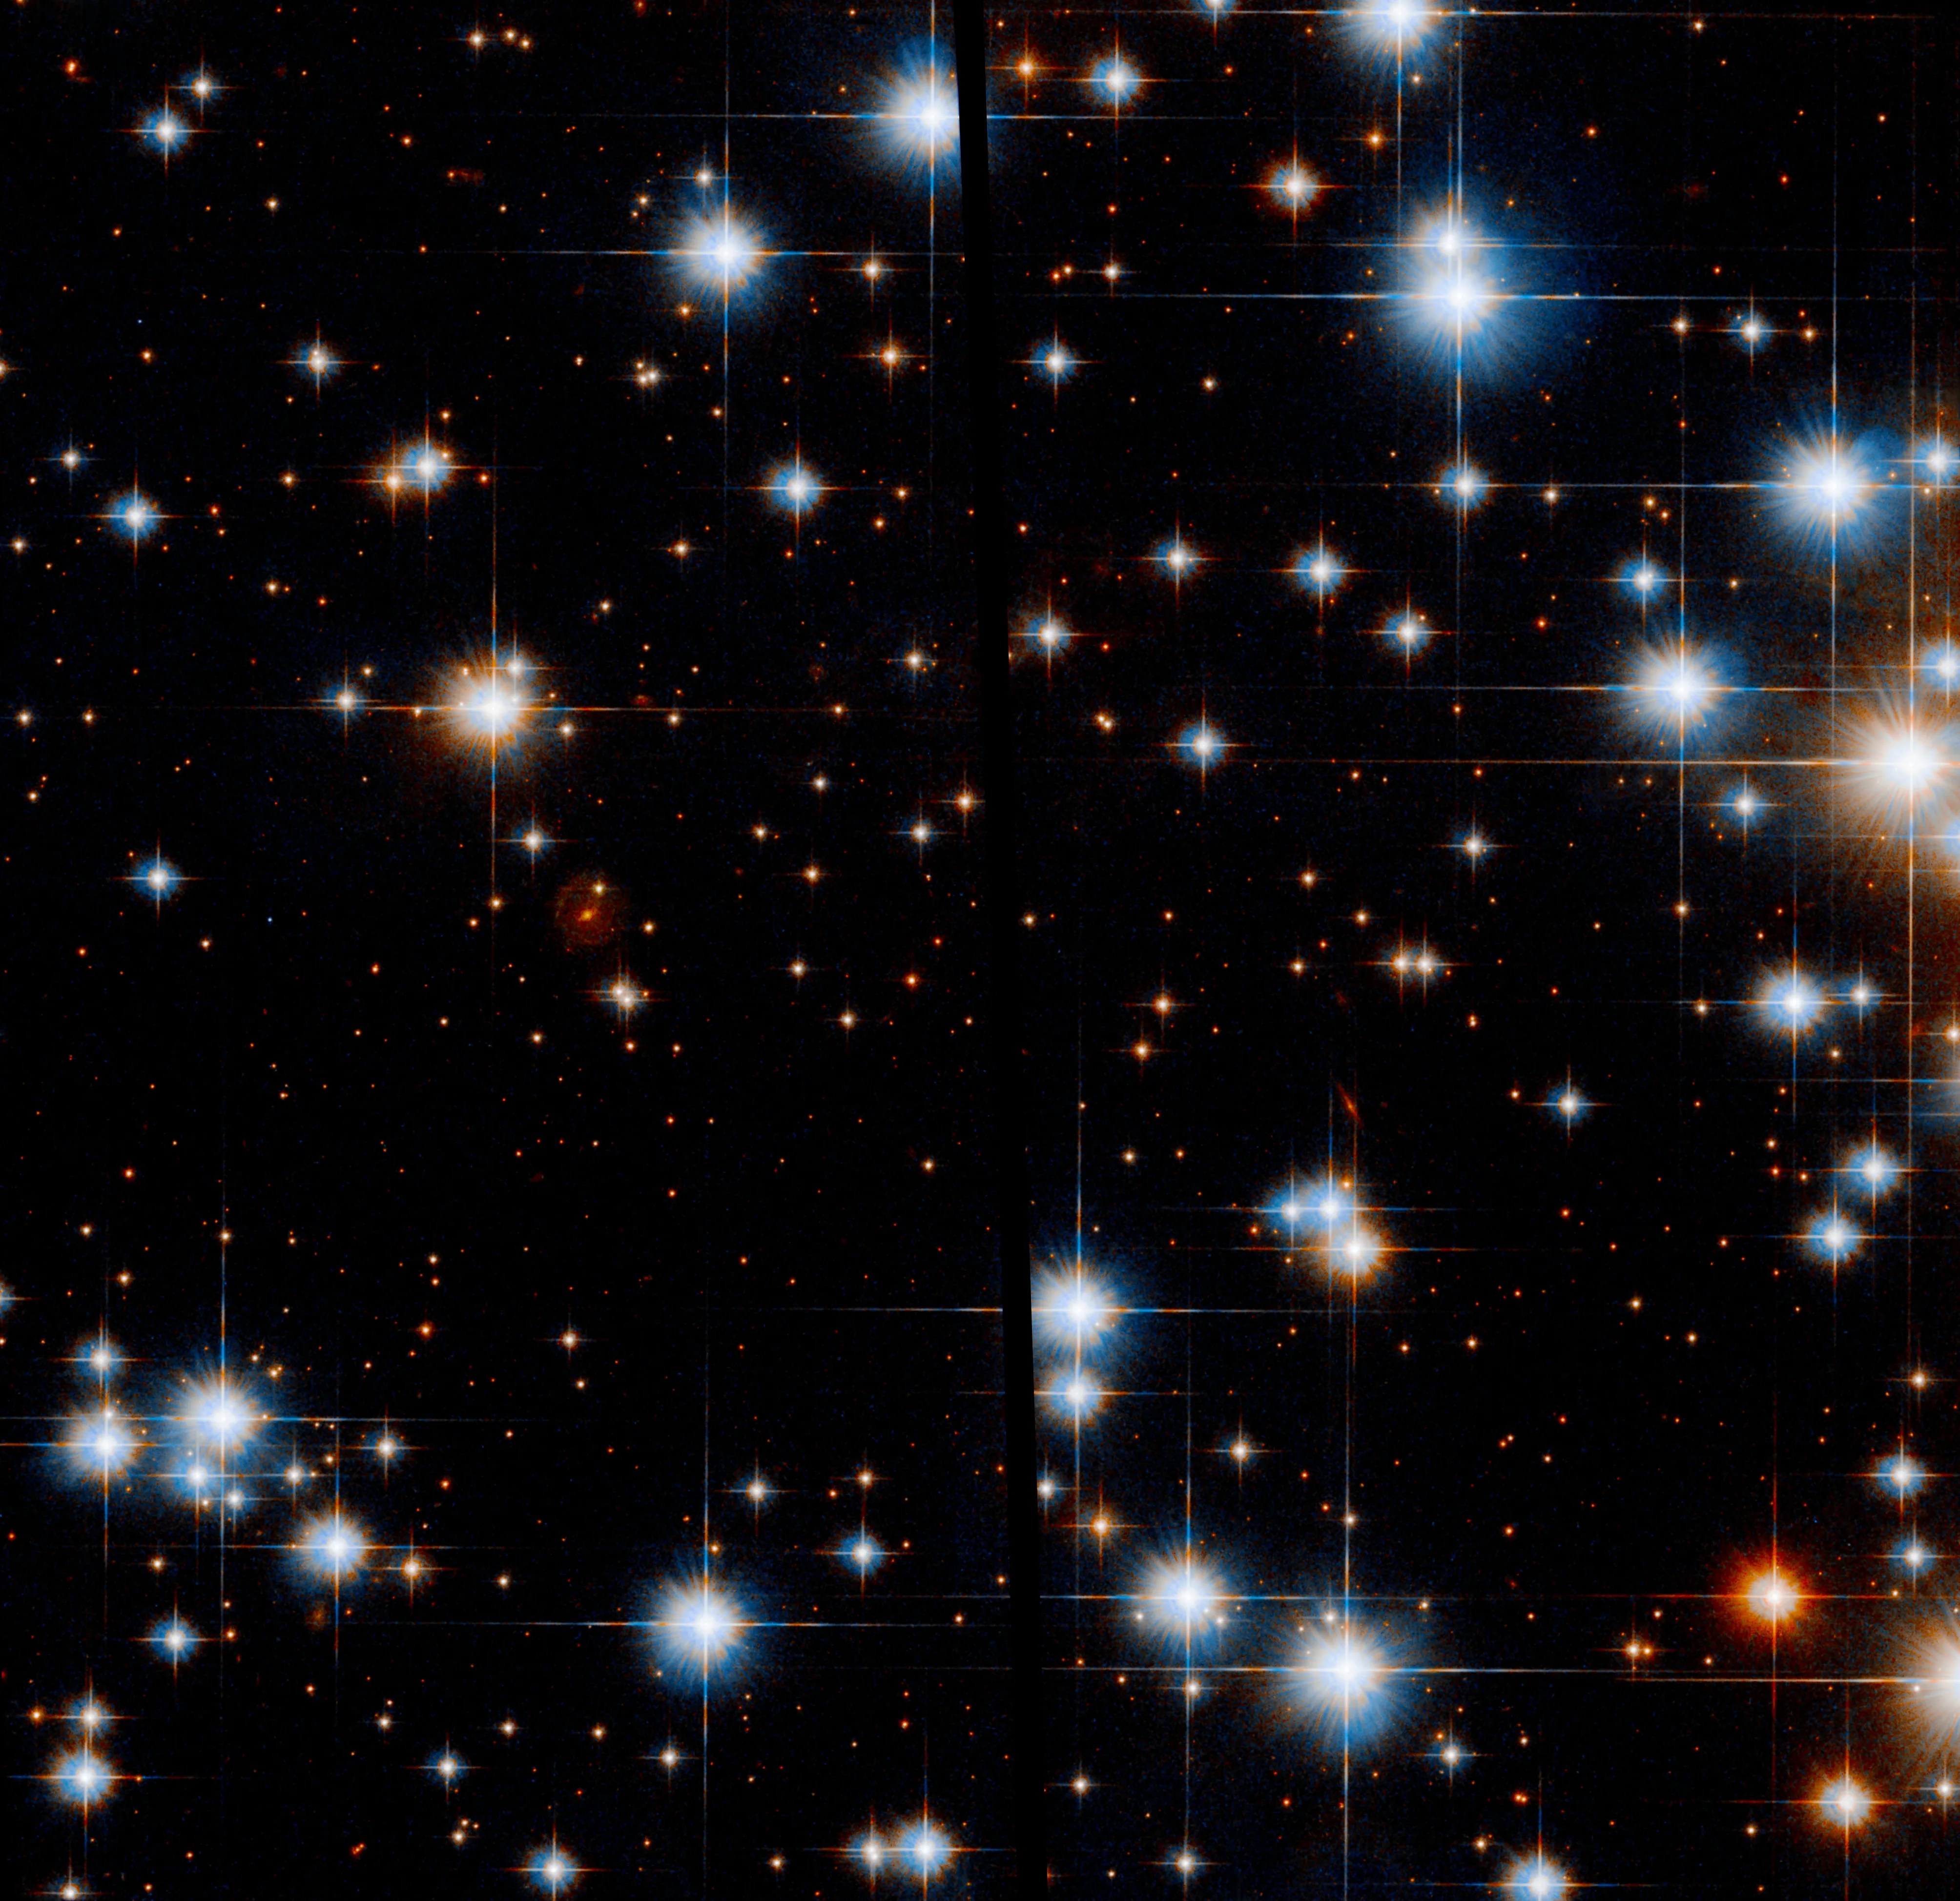 Several very bright stars are scattered throughout the field of view, with many fainter ones behind them. Most of the brightest stars are bluish-white, while the rest have a reddish-orange hue, and some slightly-less-bright stars are deep red.